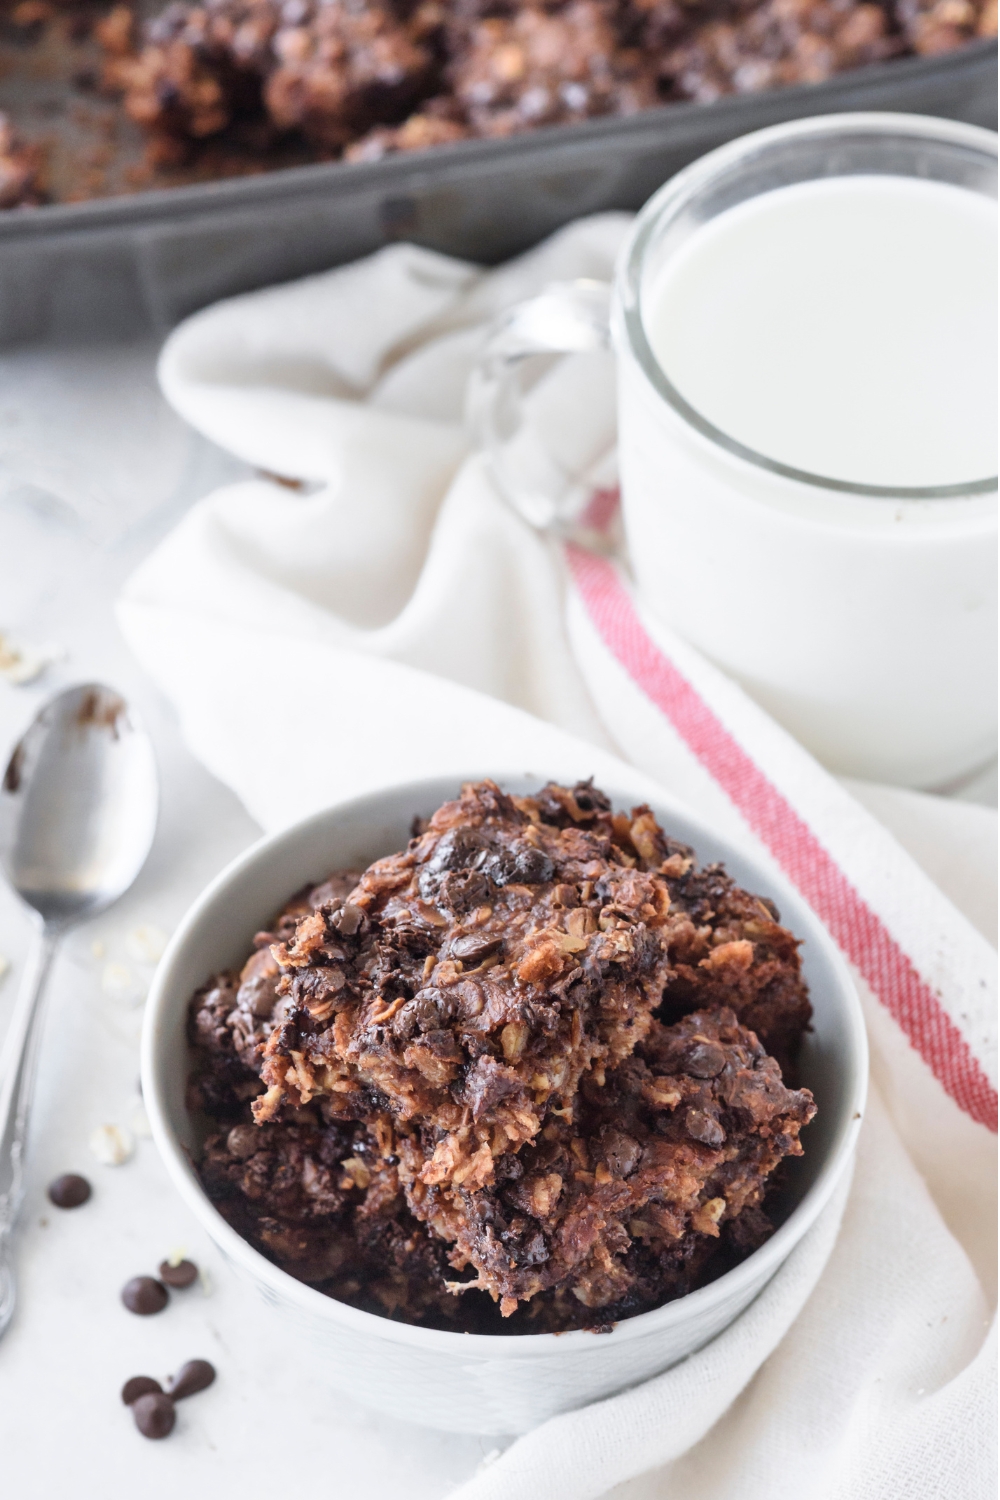 A bowl with a heaping pile of brownie baked oatmeal. A cup of milk and the remaining baked oats are in the background.